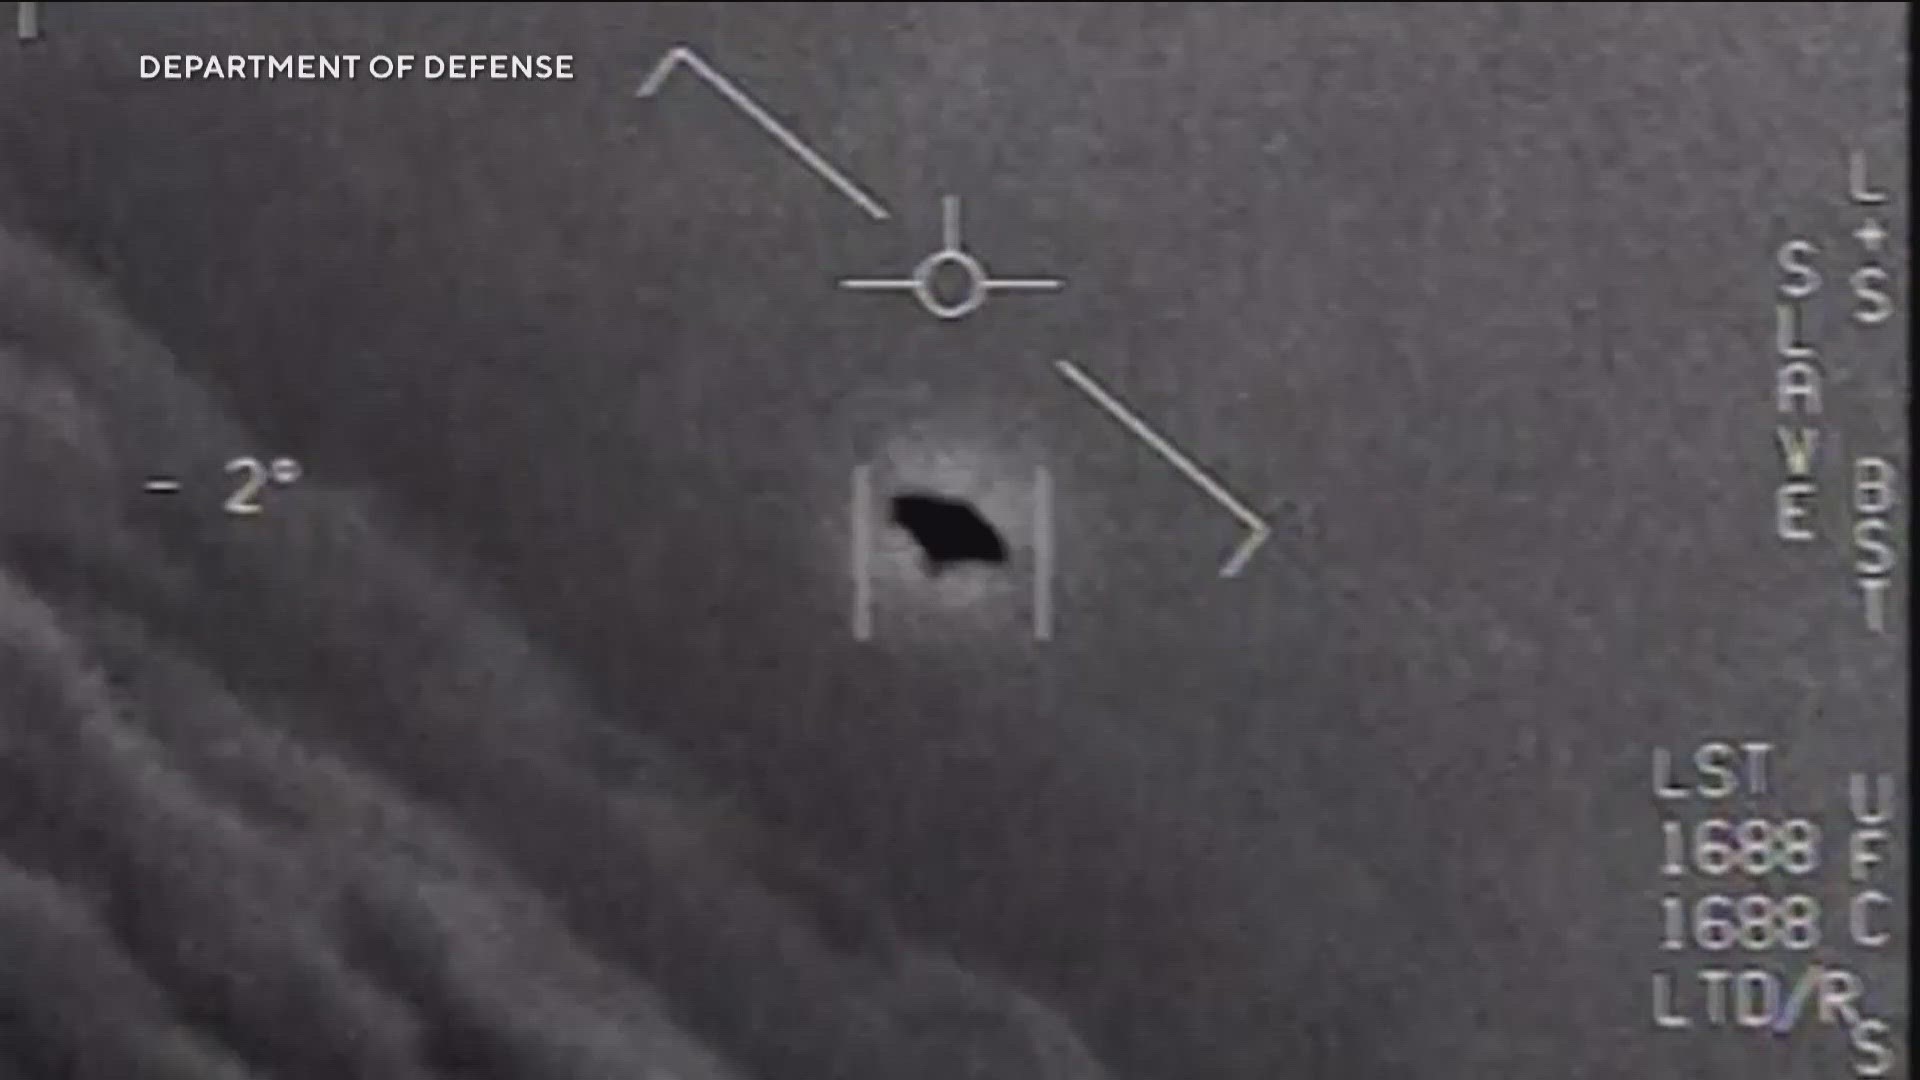 While the study of UFOs often evokes talk of aliens, Democrats and Republicans in recent years have pushed for more research as a national security matter.